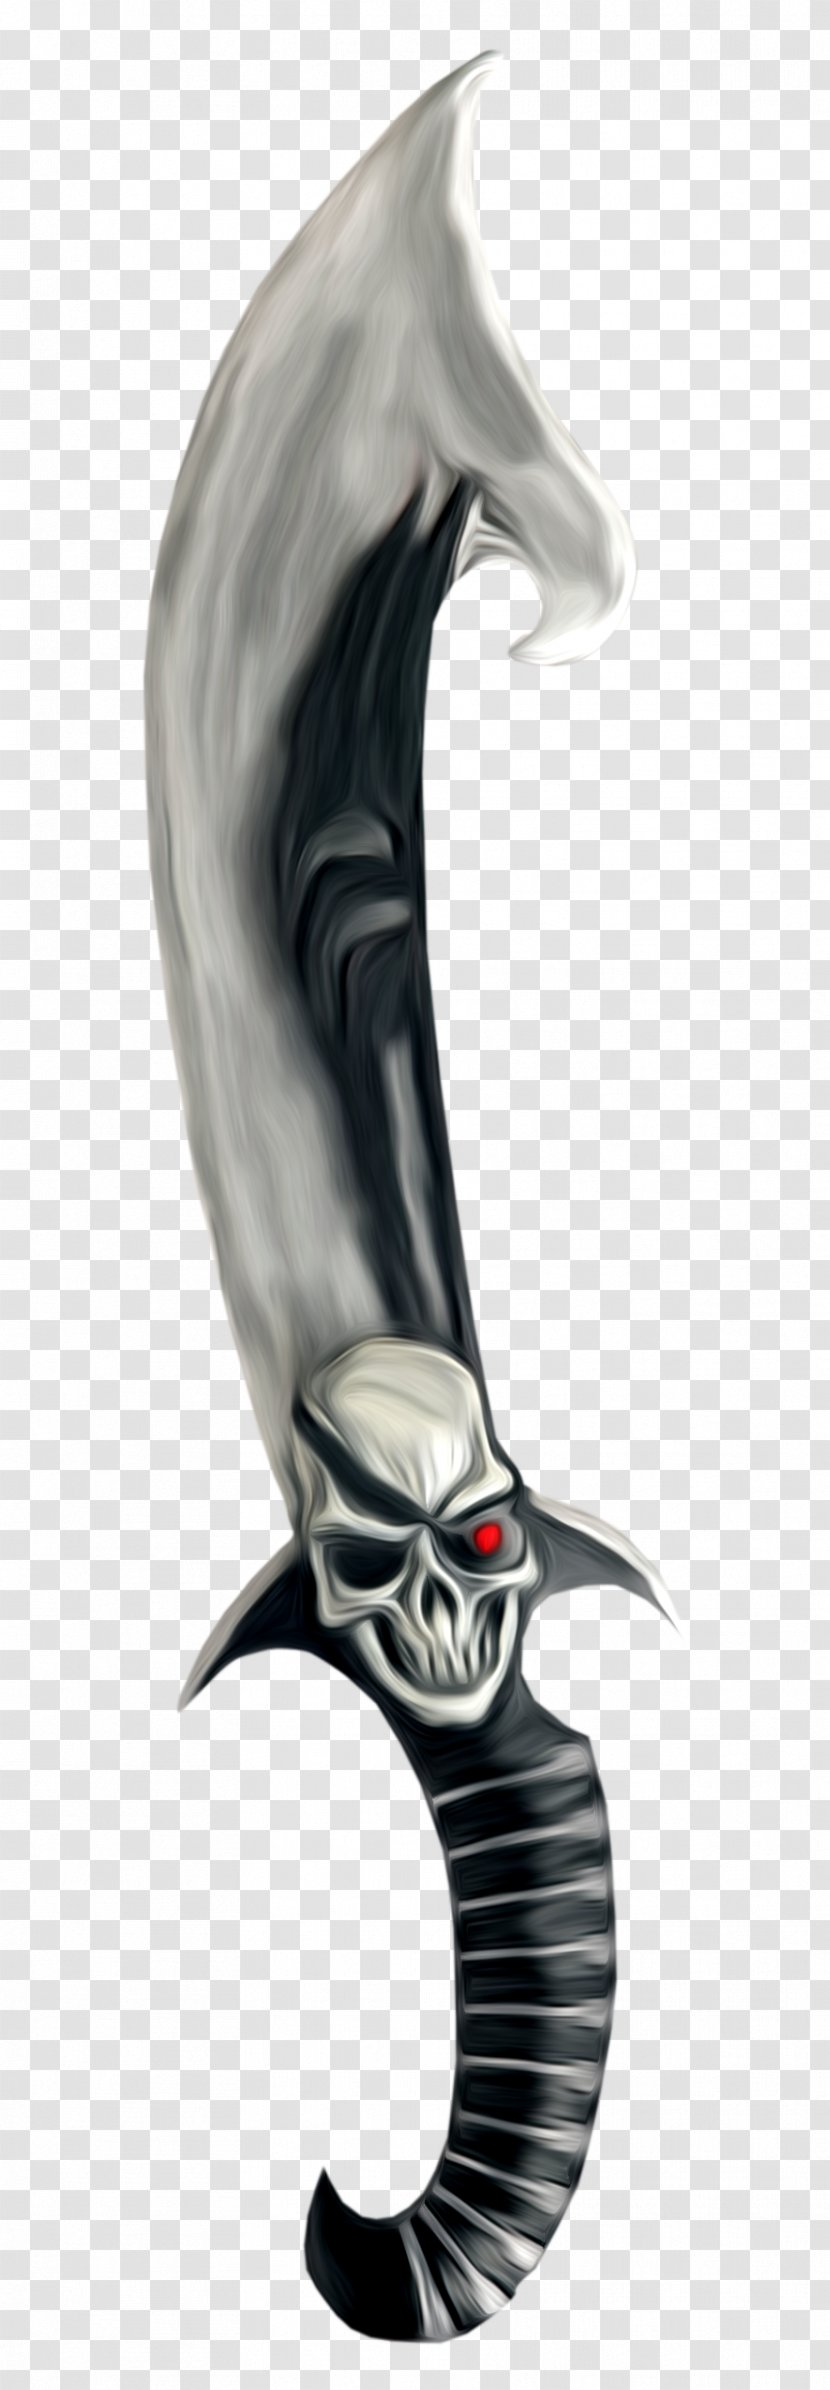 Knife Piracy Sword Weapon Dagger - Clothing Transparent PNG